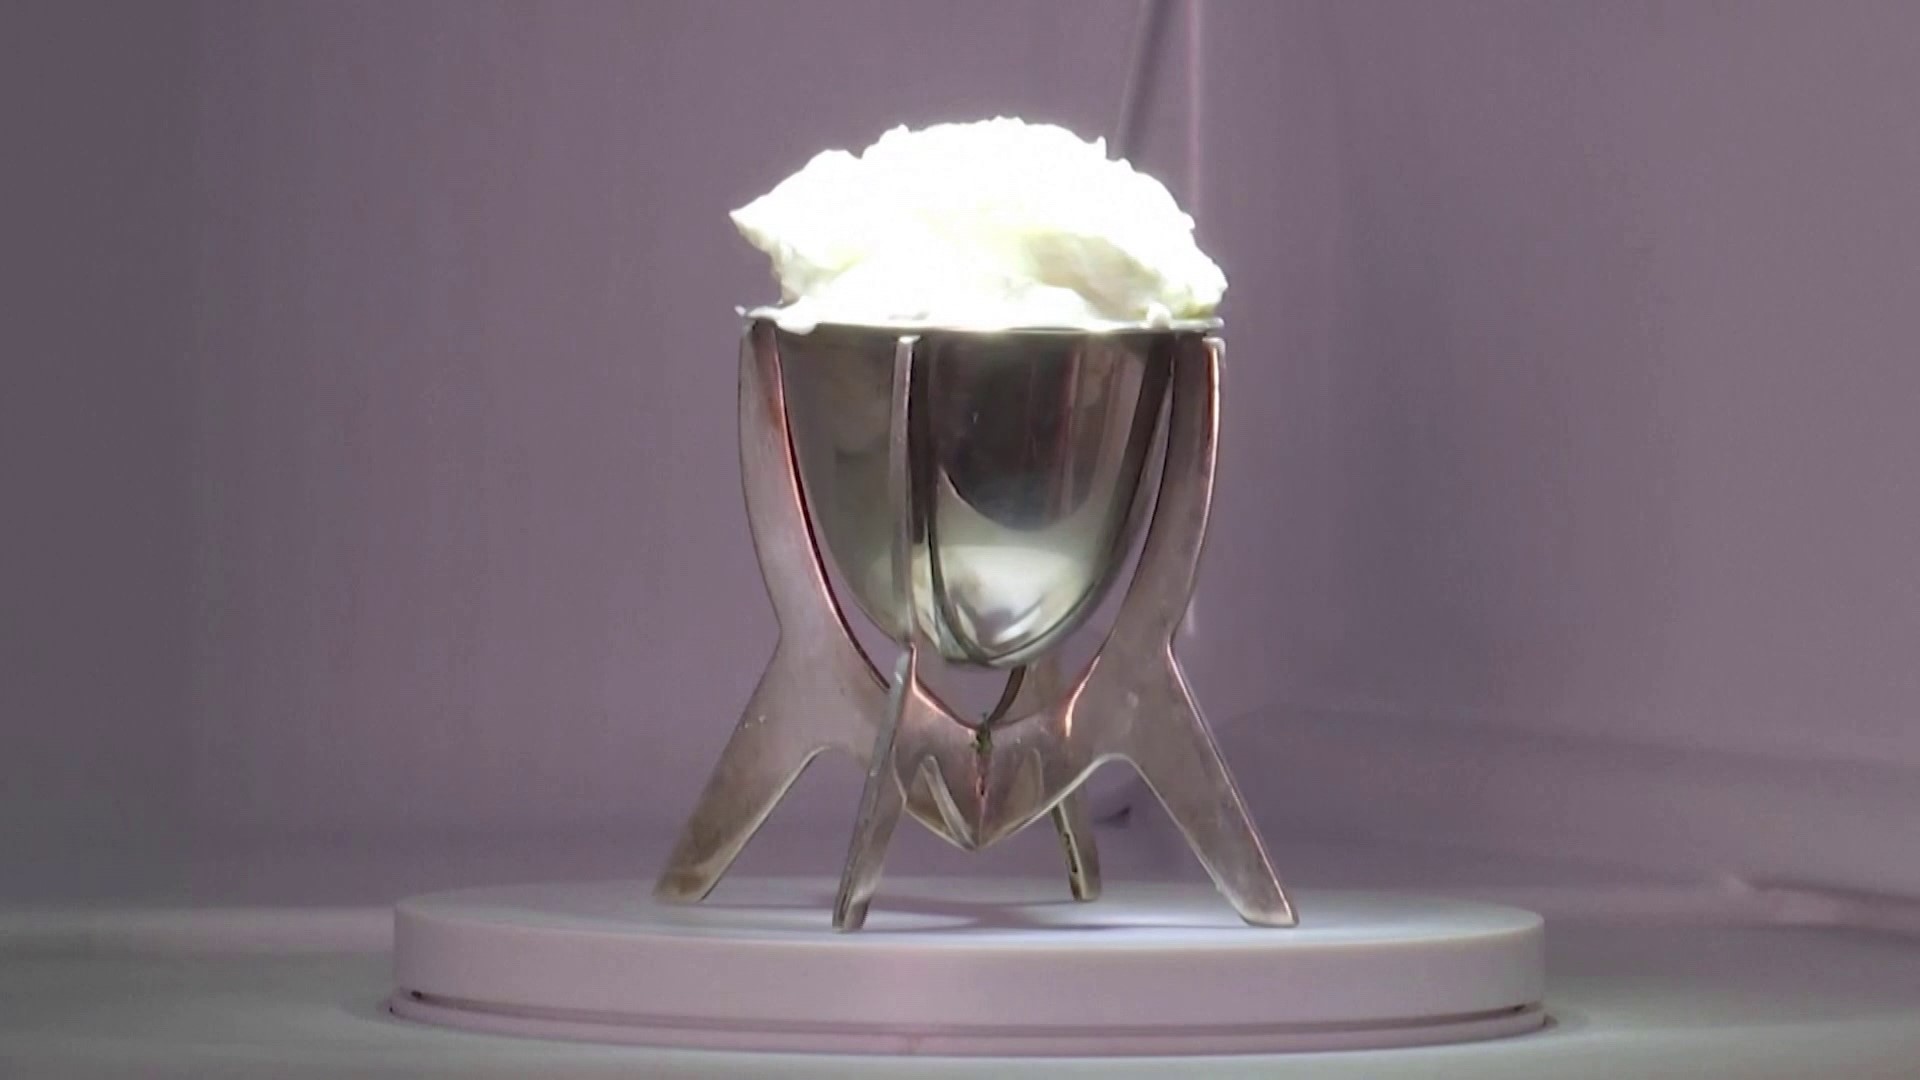 A designer based in London has created the world's first ice cream made from plastic.